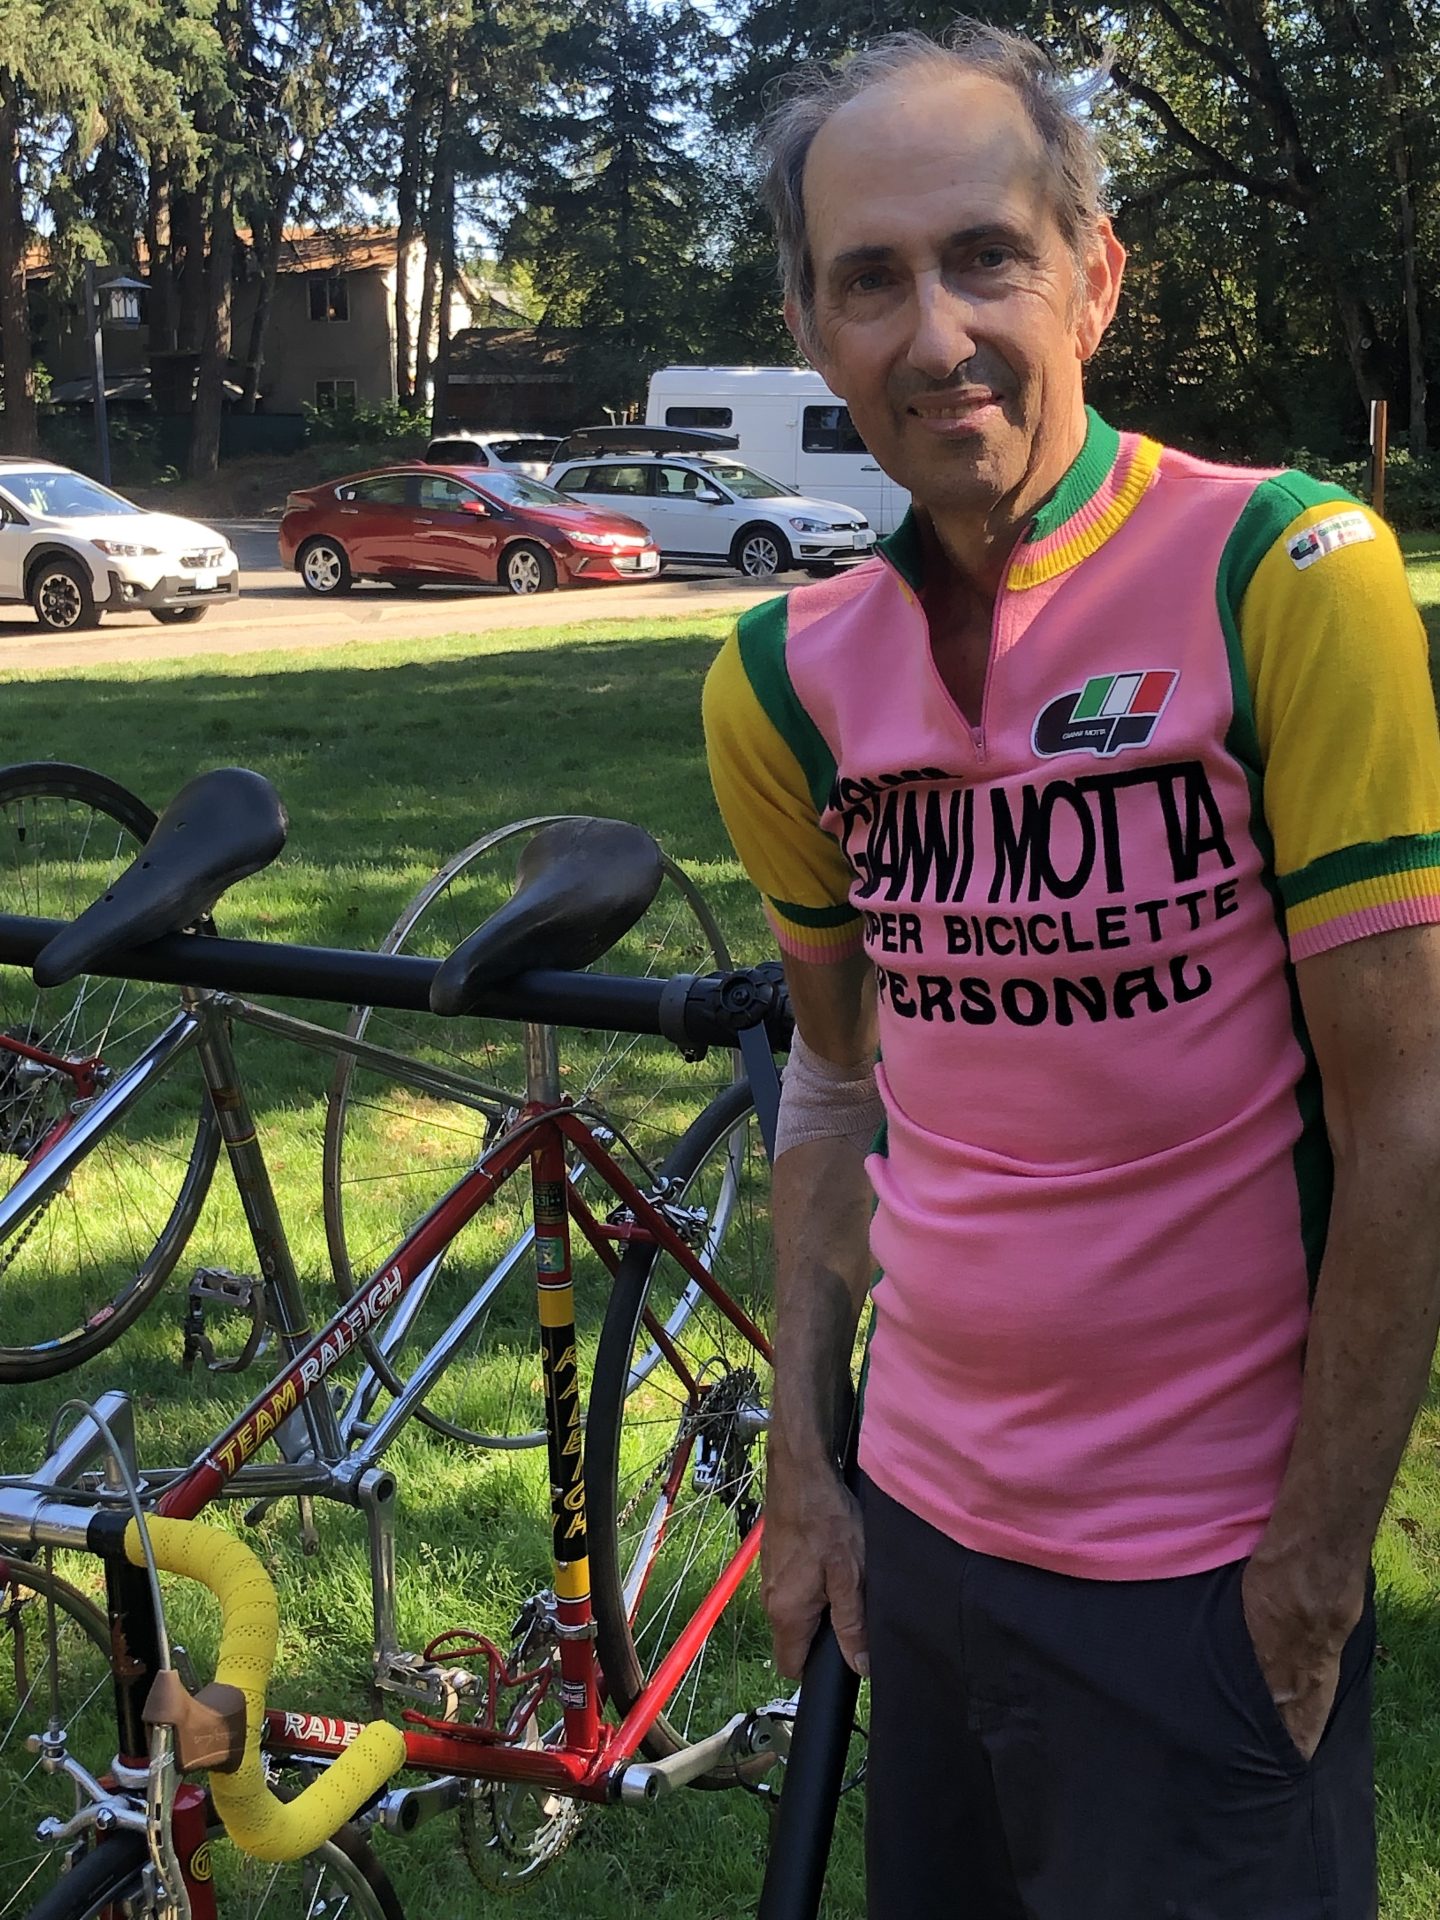 Tim Rutledge smiles as he poses with an old Raleigh road bike. He has grey, thinning hair and is partly bald, and wears a pink, green, and yellow Motta jersey like the ones designed for the Giro. He has a slight smile on his face.